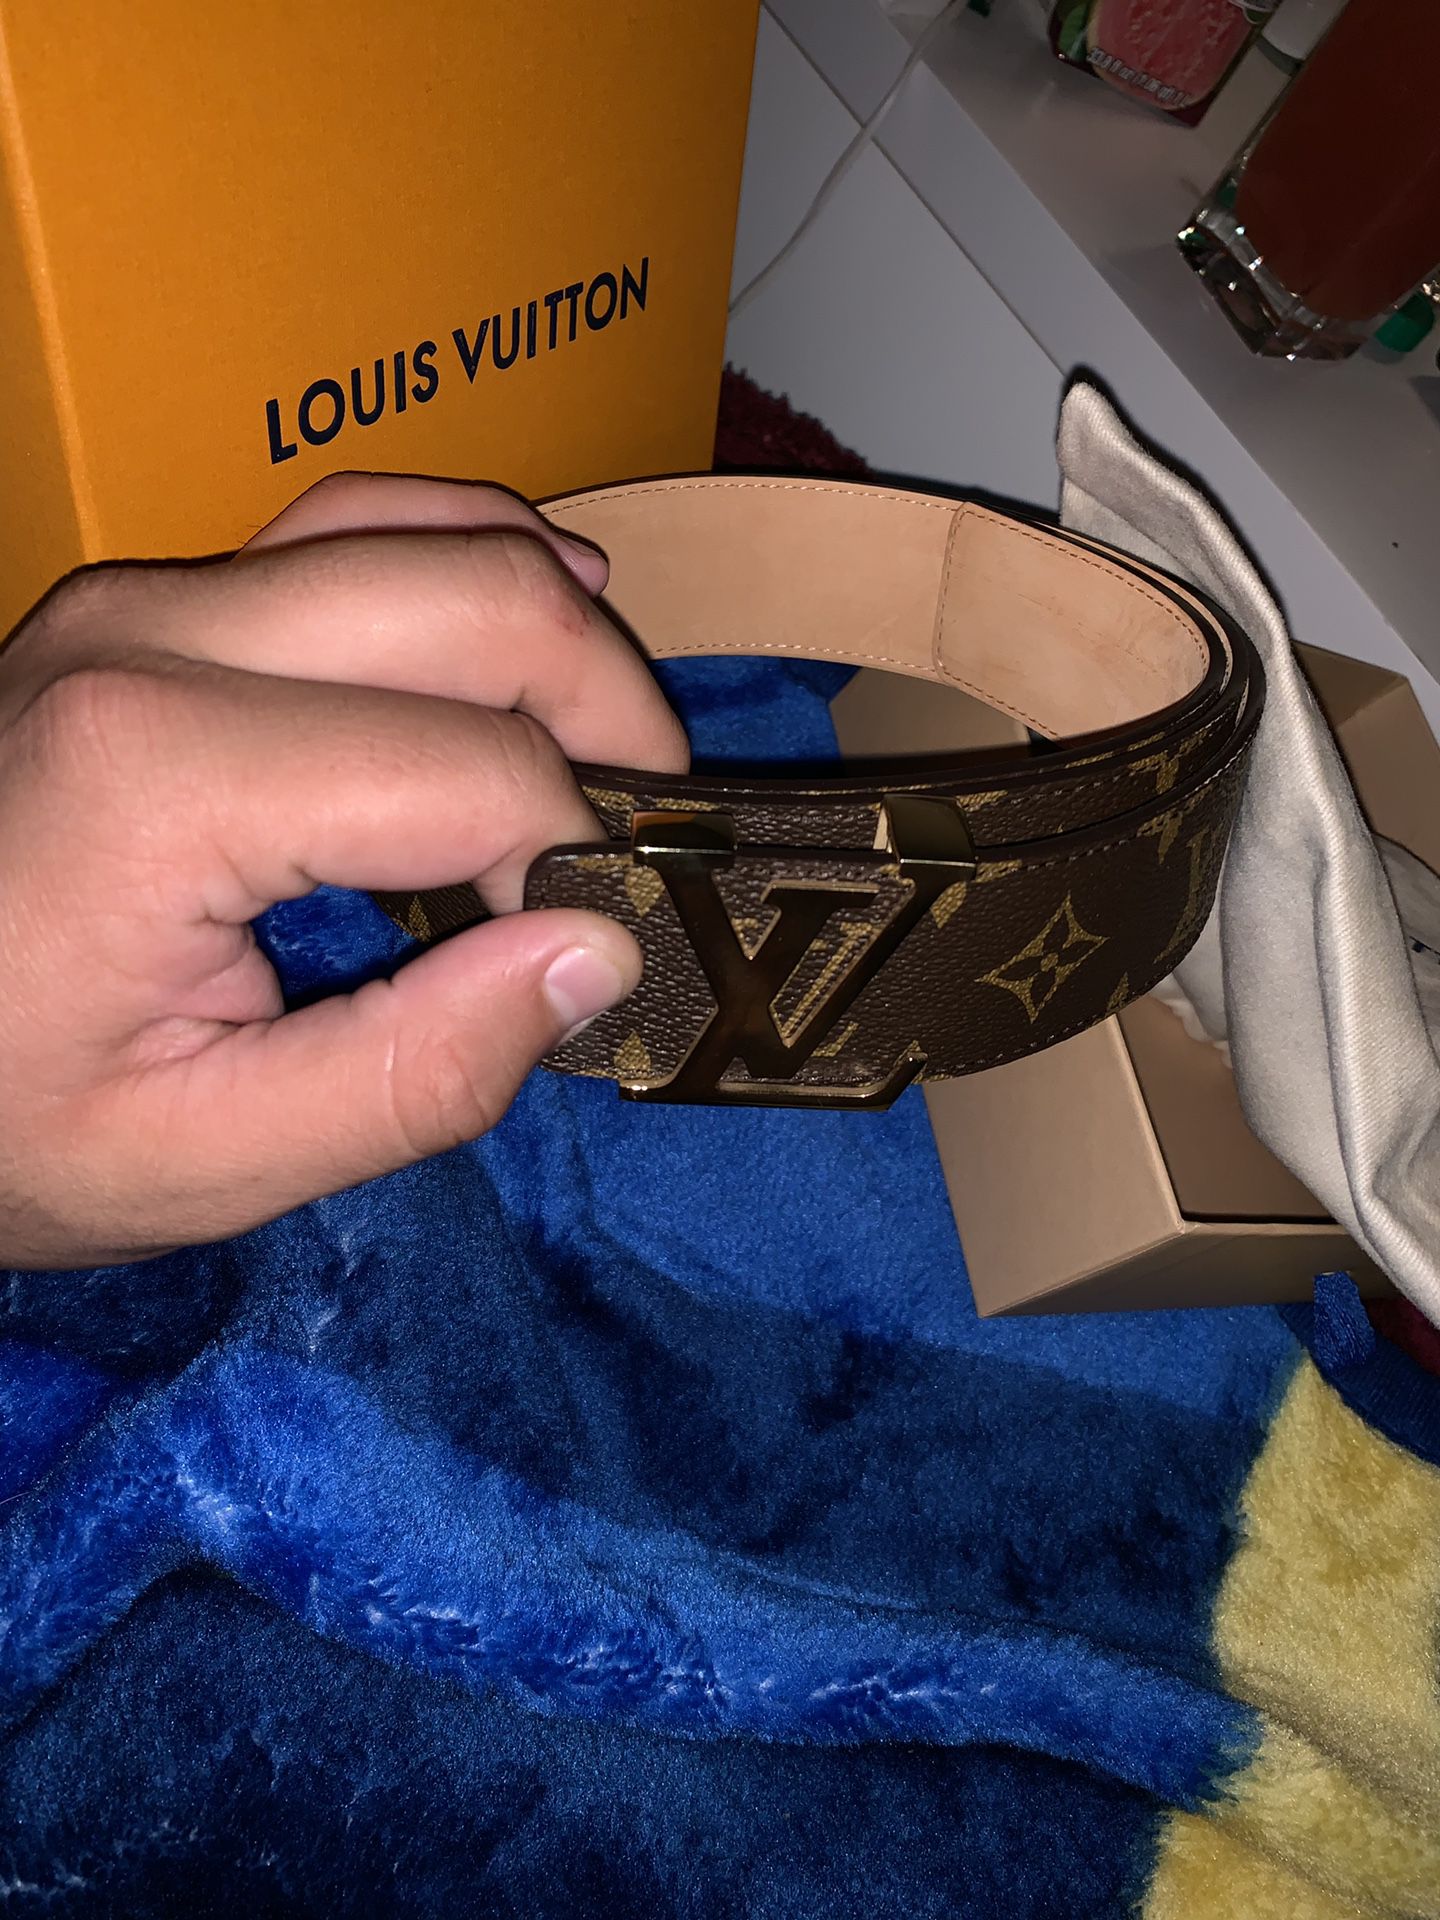 BRAND NEW Lv Louis Vuitton belt SIZE 40 for Sale in San Mateo, CA - OfferUp